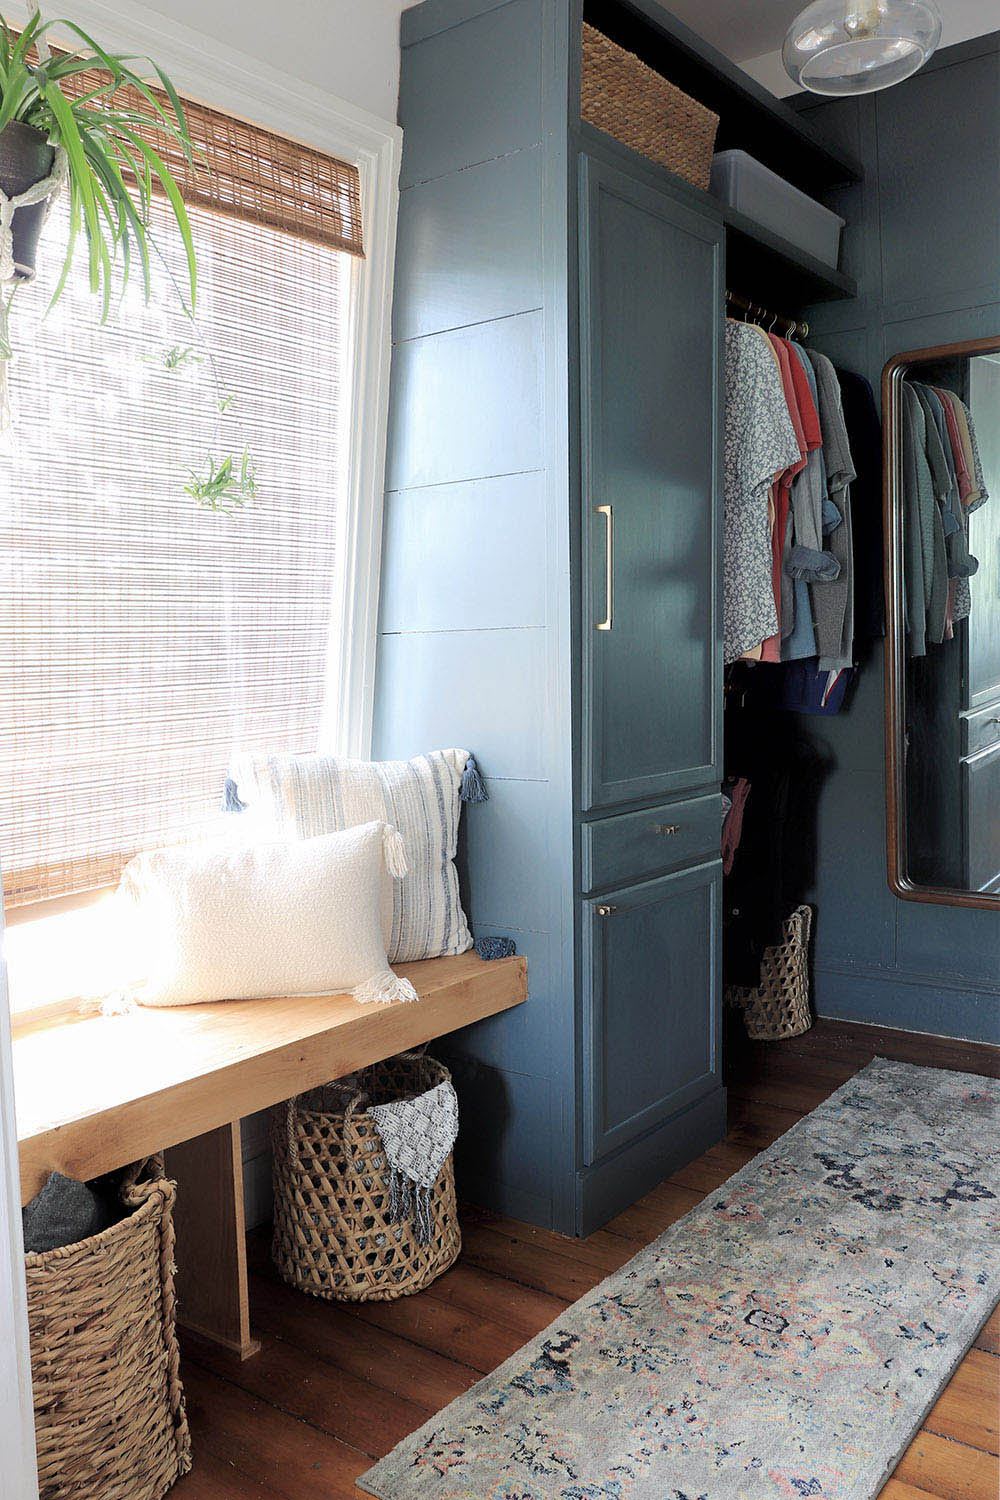 A closet with pillows on the bench and a rug on the floor